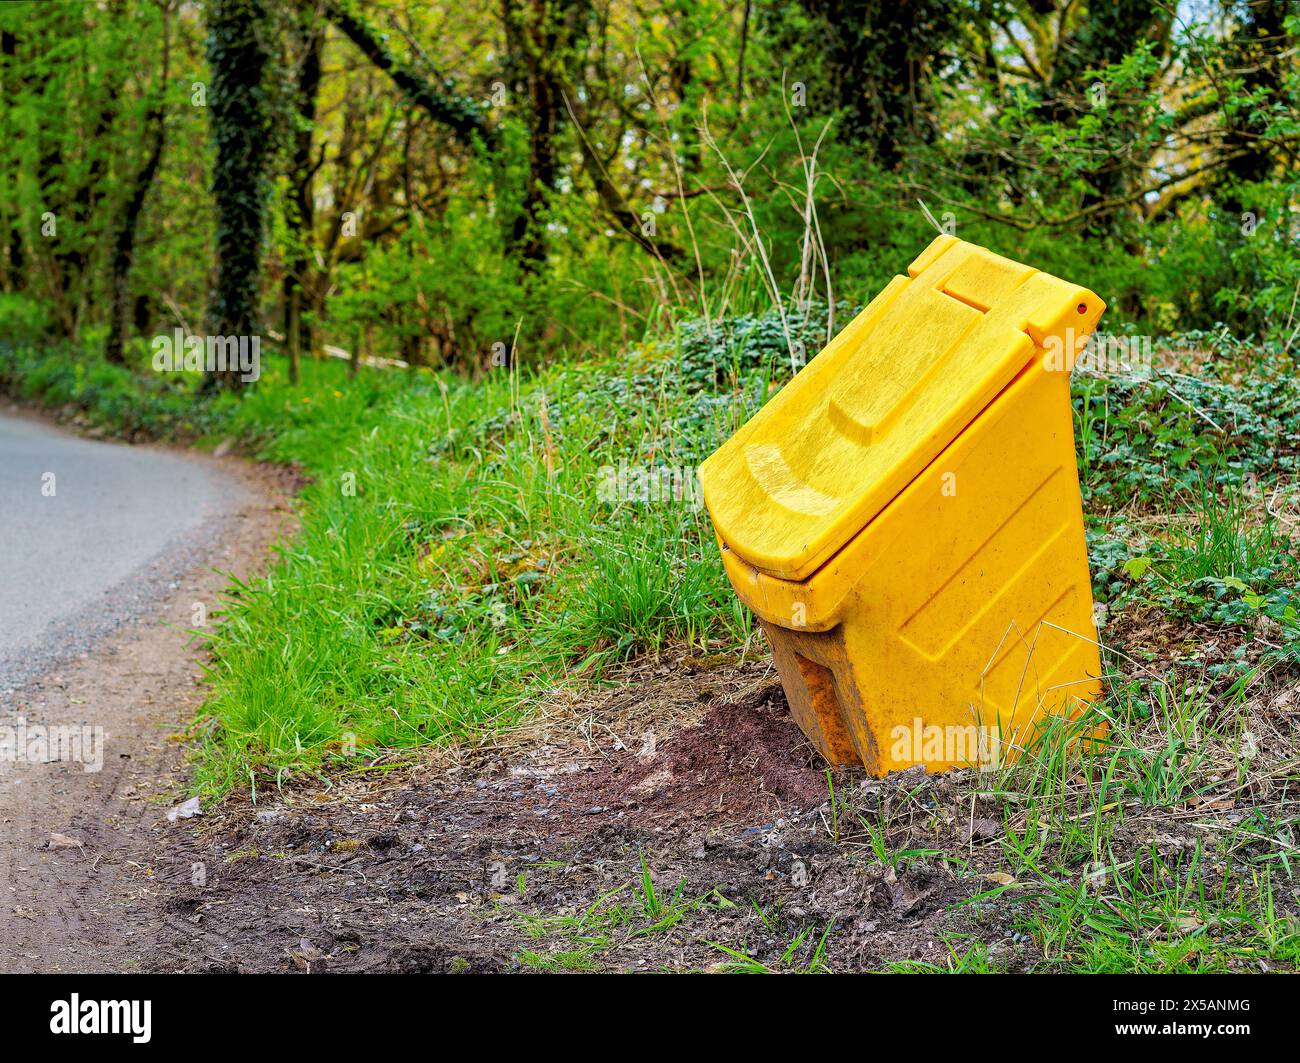 gritting bin by the road side yellow high visibility grit storage for slippy roads in winter. Stock Photo